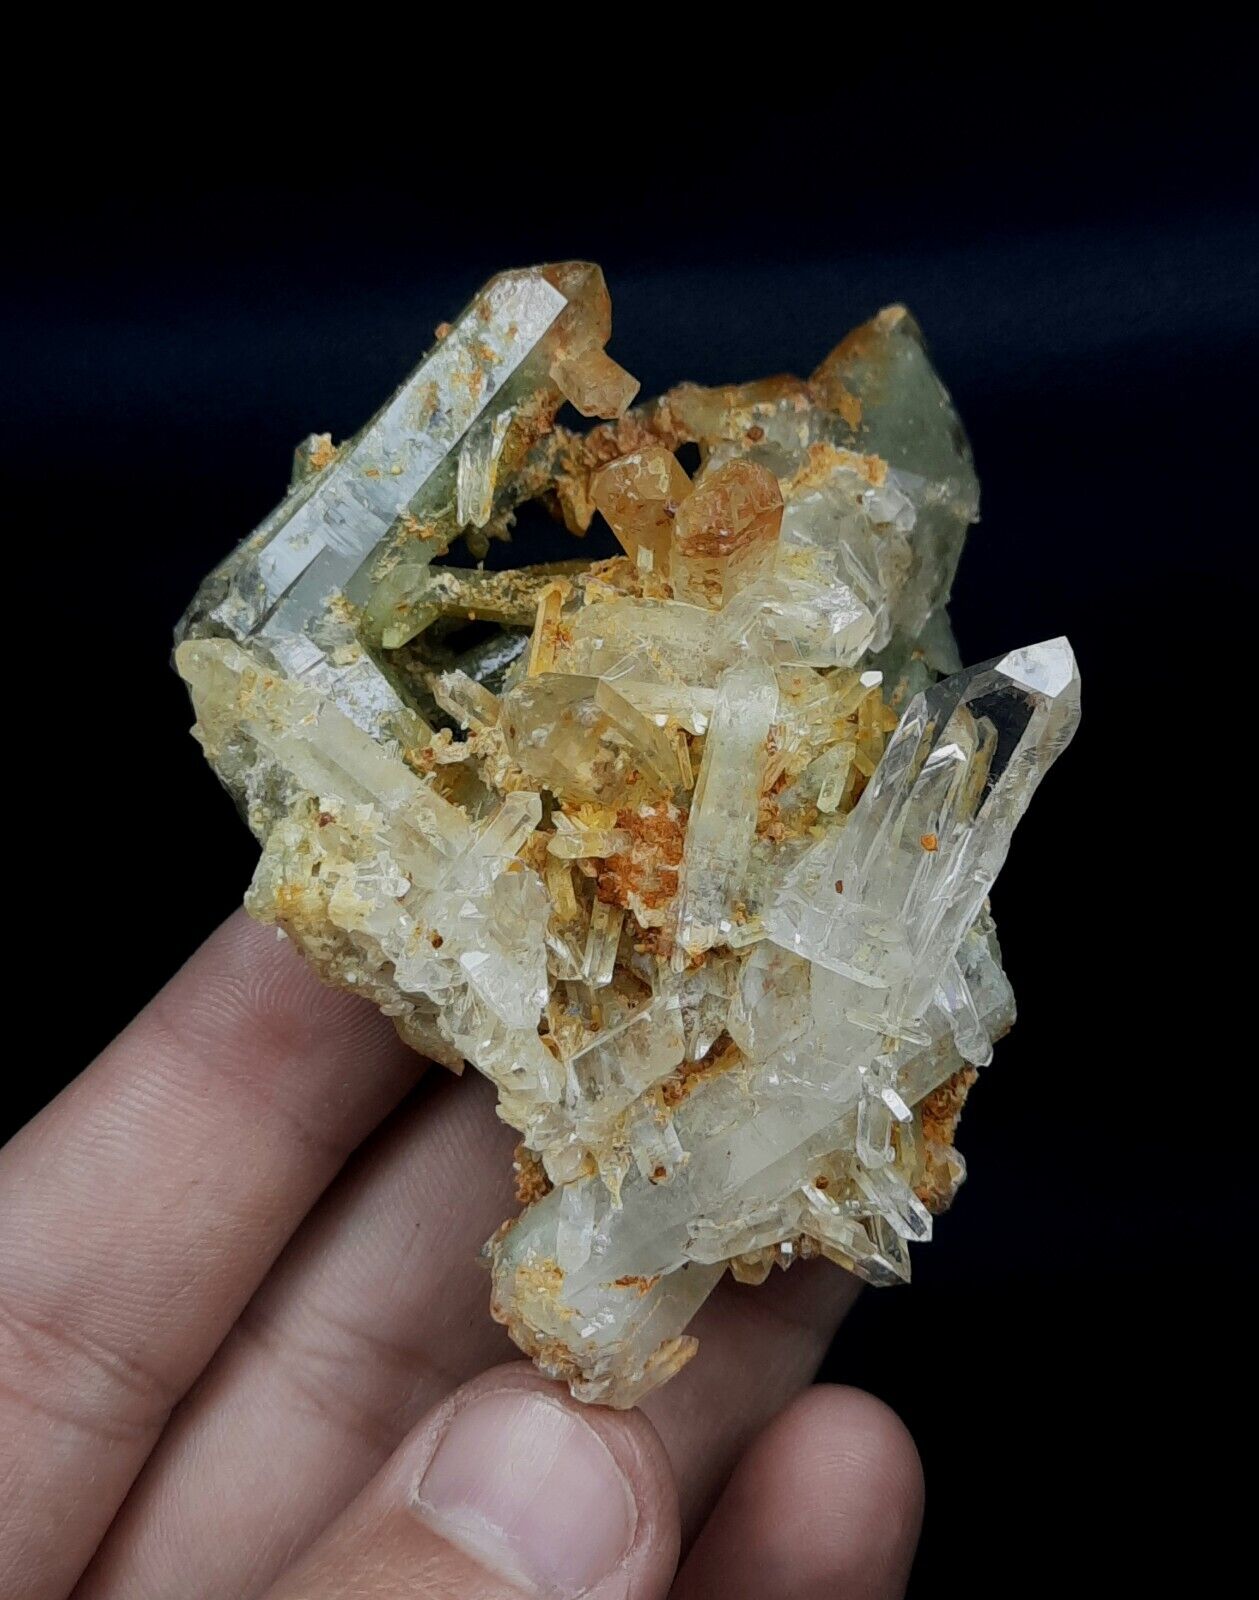 Chlorite Included Iron Coated Quartz Cluster From Balochistan Pakistan.